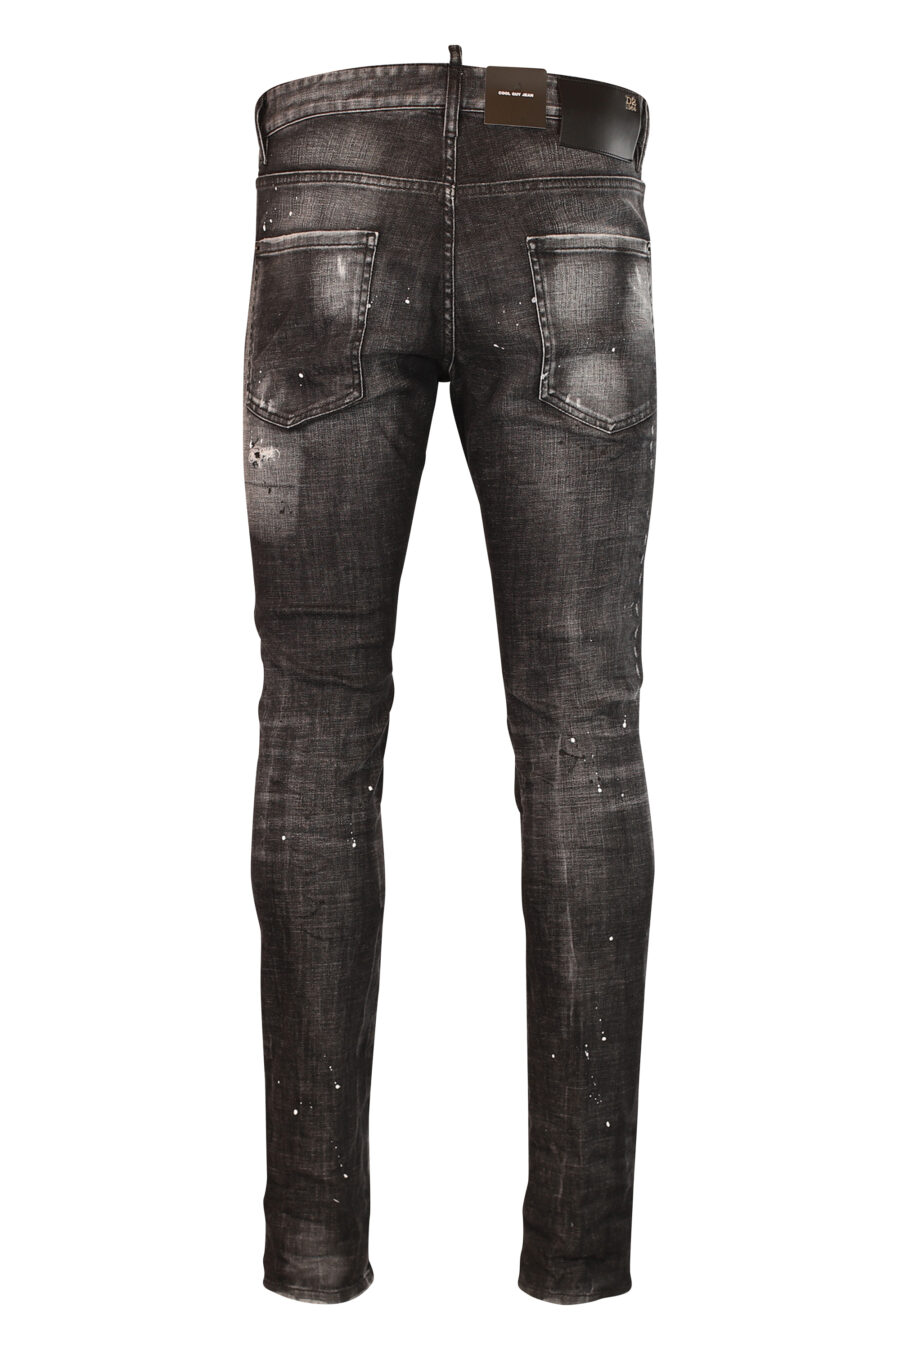 Cool guy jean trousers black semi worn and ripped - 8052134953105 3